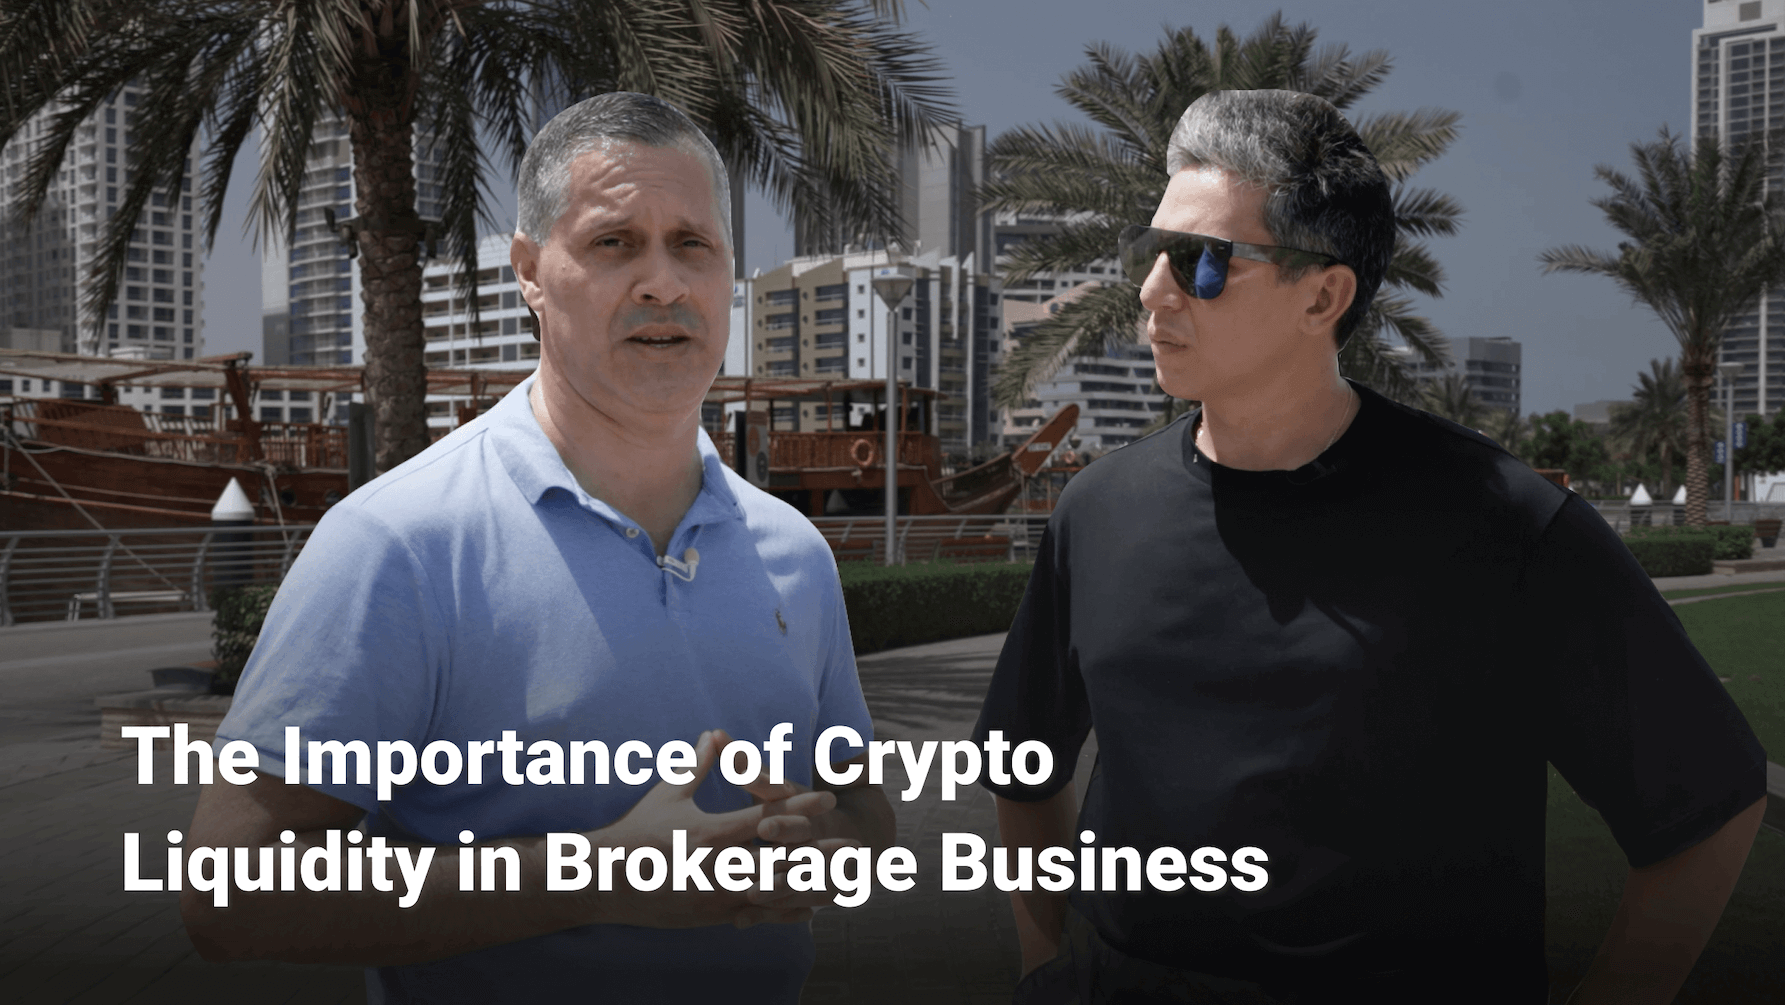 The Importance of Crypto Liquidity in Brokerage Business